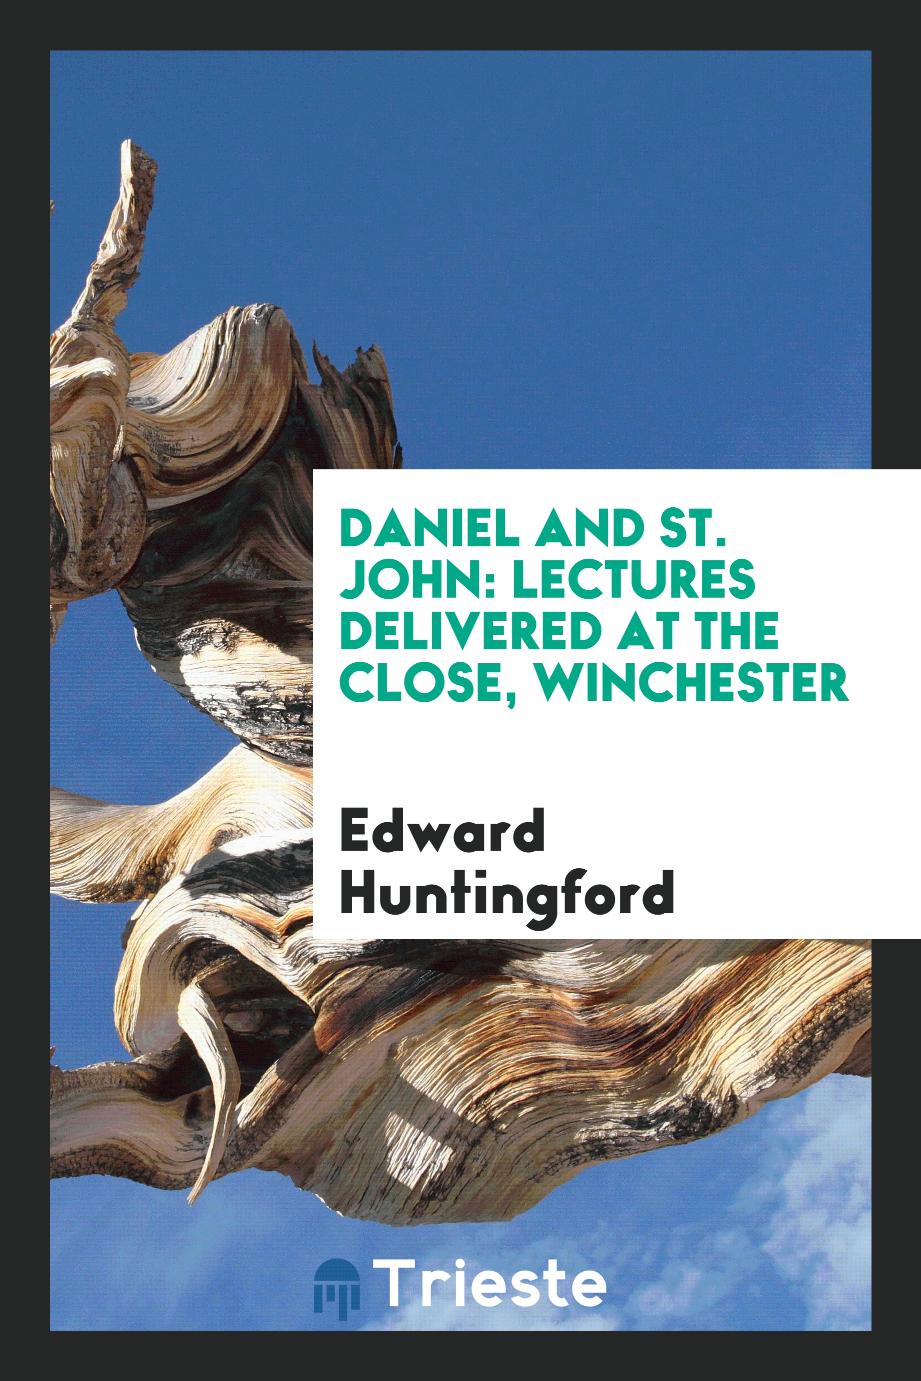 Daniel and St. John: lectures delivered at the Close, Winchester